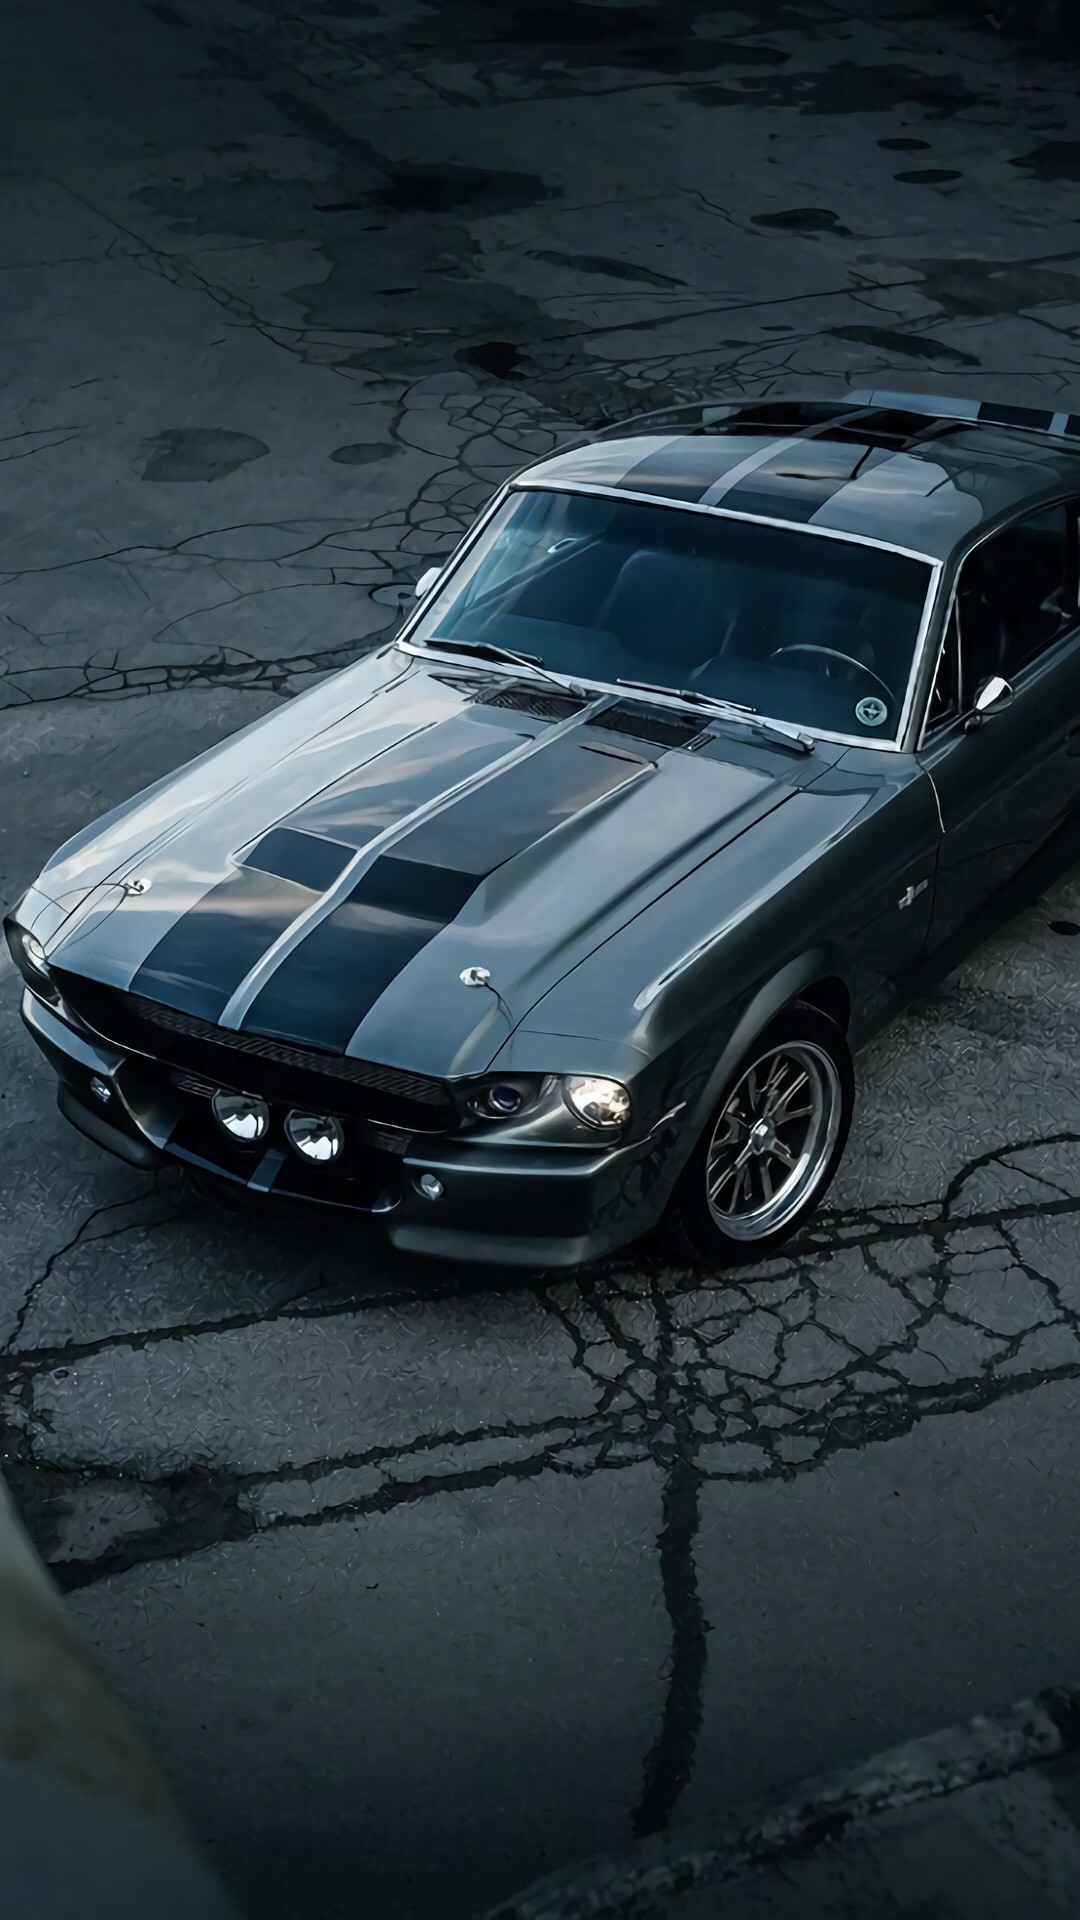 1080x1920, Hd Iphone Wallpapers 3 
 Data Id 173915 - Mustang Shelby Wallpaper Iphone - HD Wallpaper 